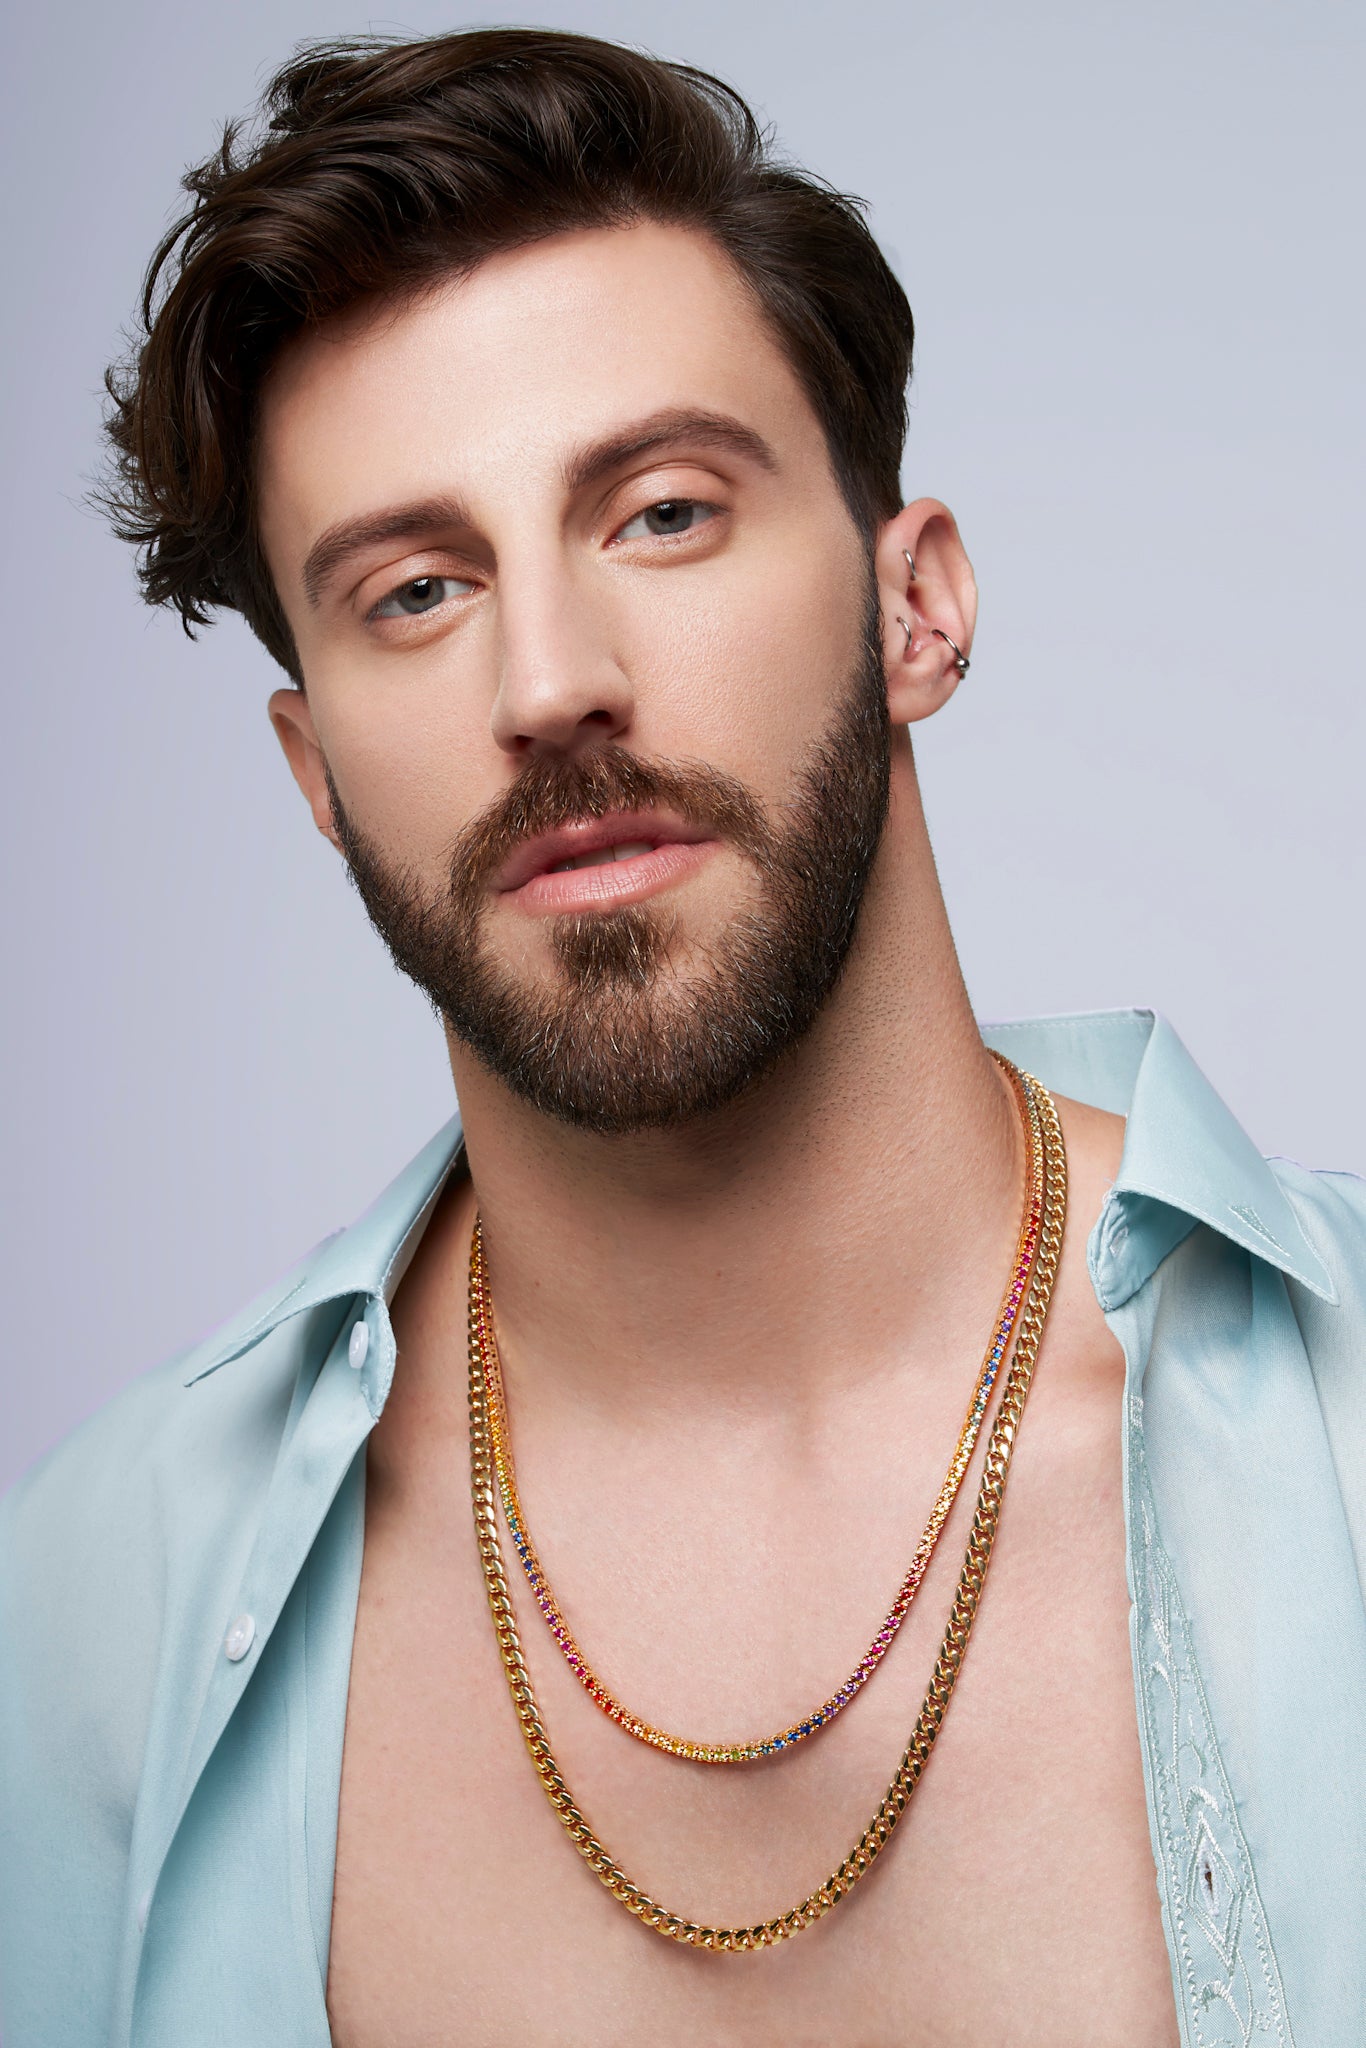 Male model with jewellery